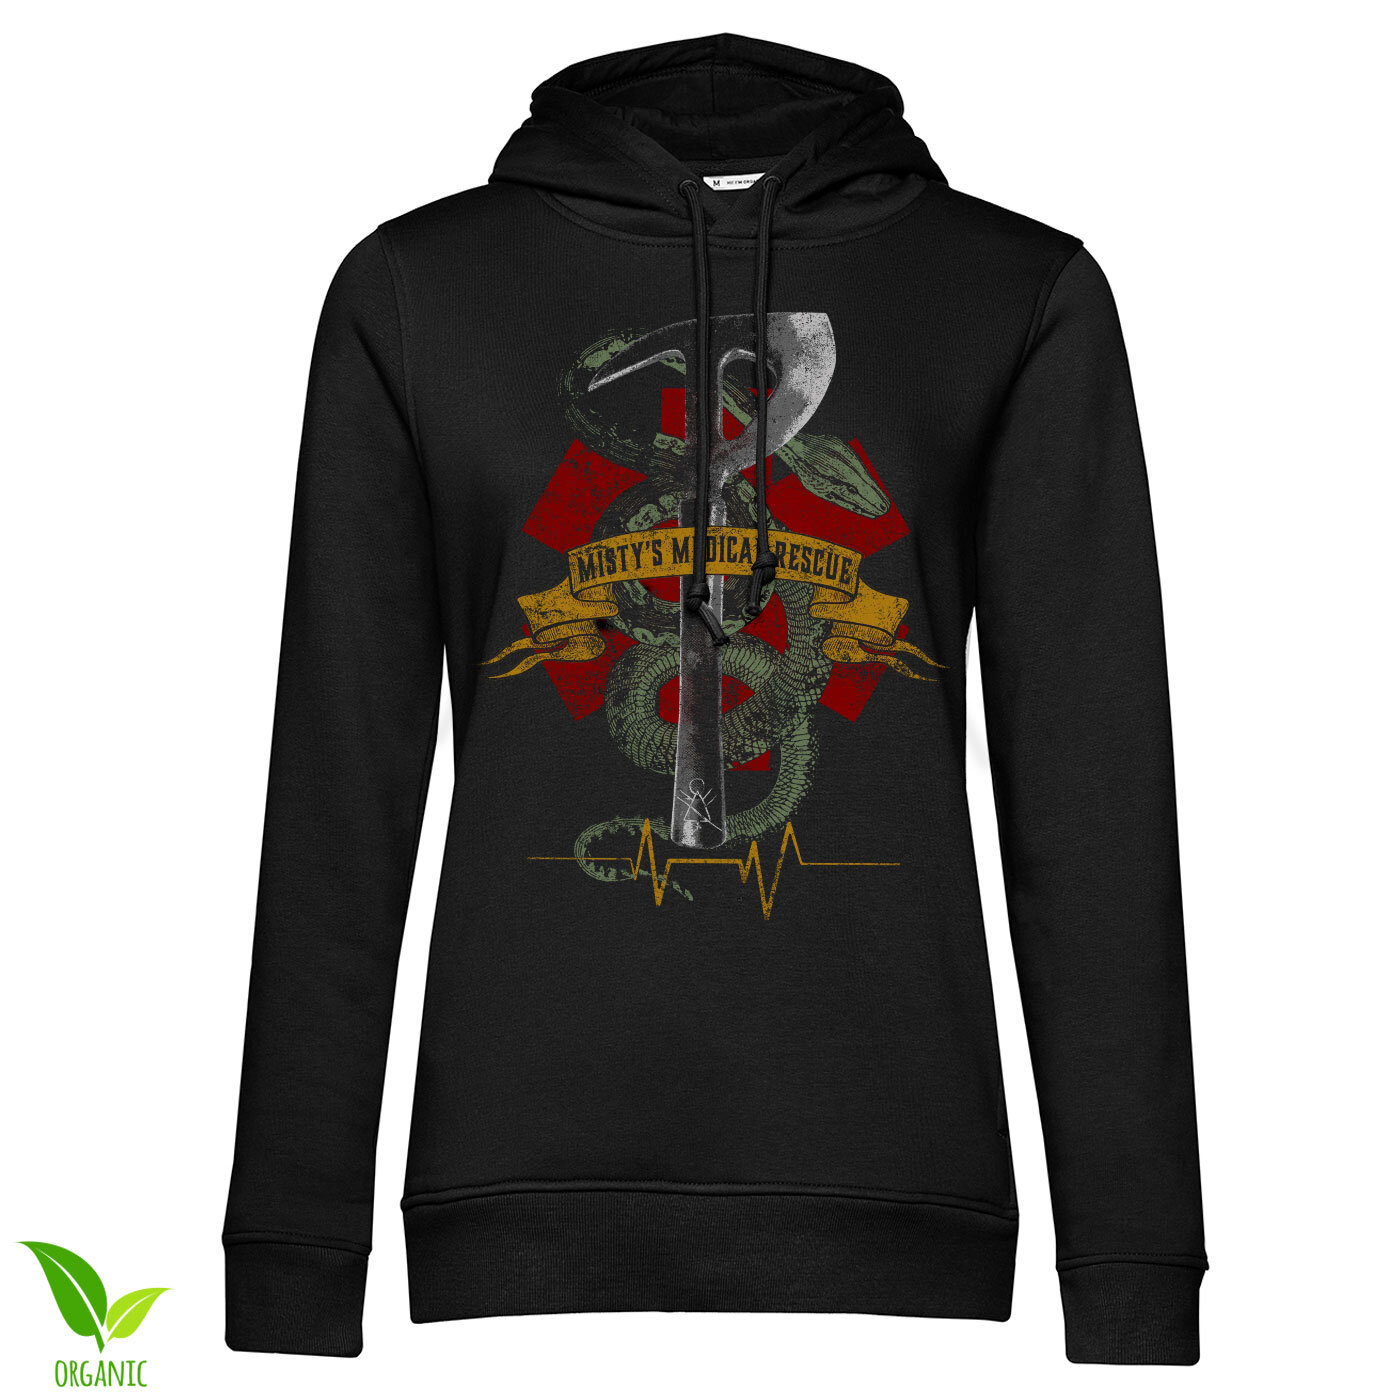 Misty's Medical Rescue Girls Hoodie